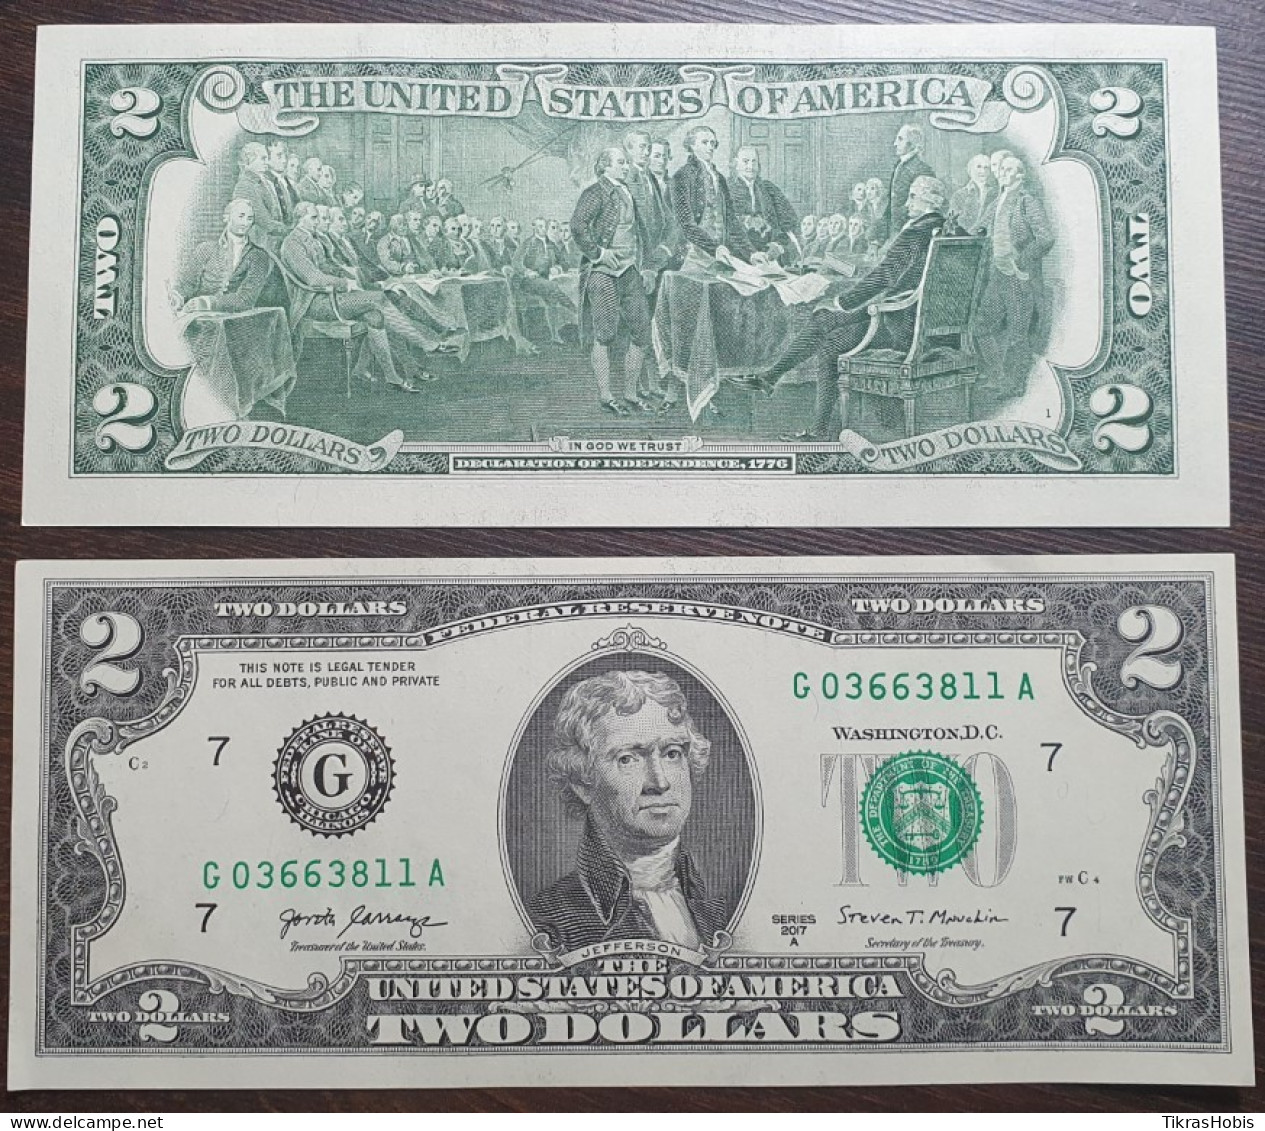 US $ 2, 2017 P-545bg - National Currency